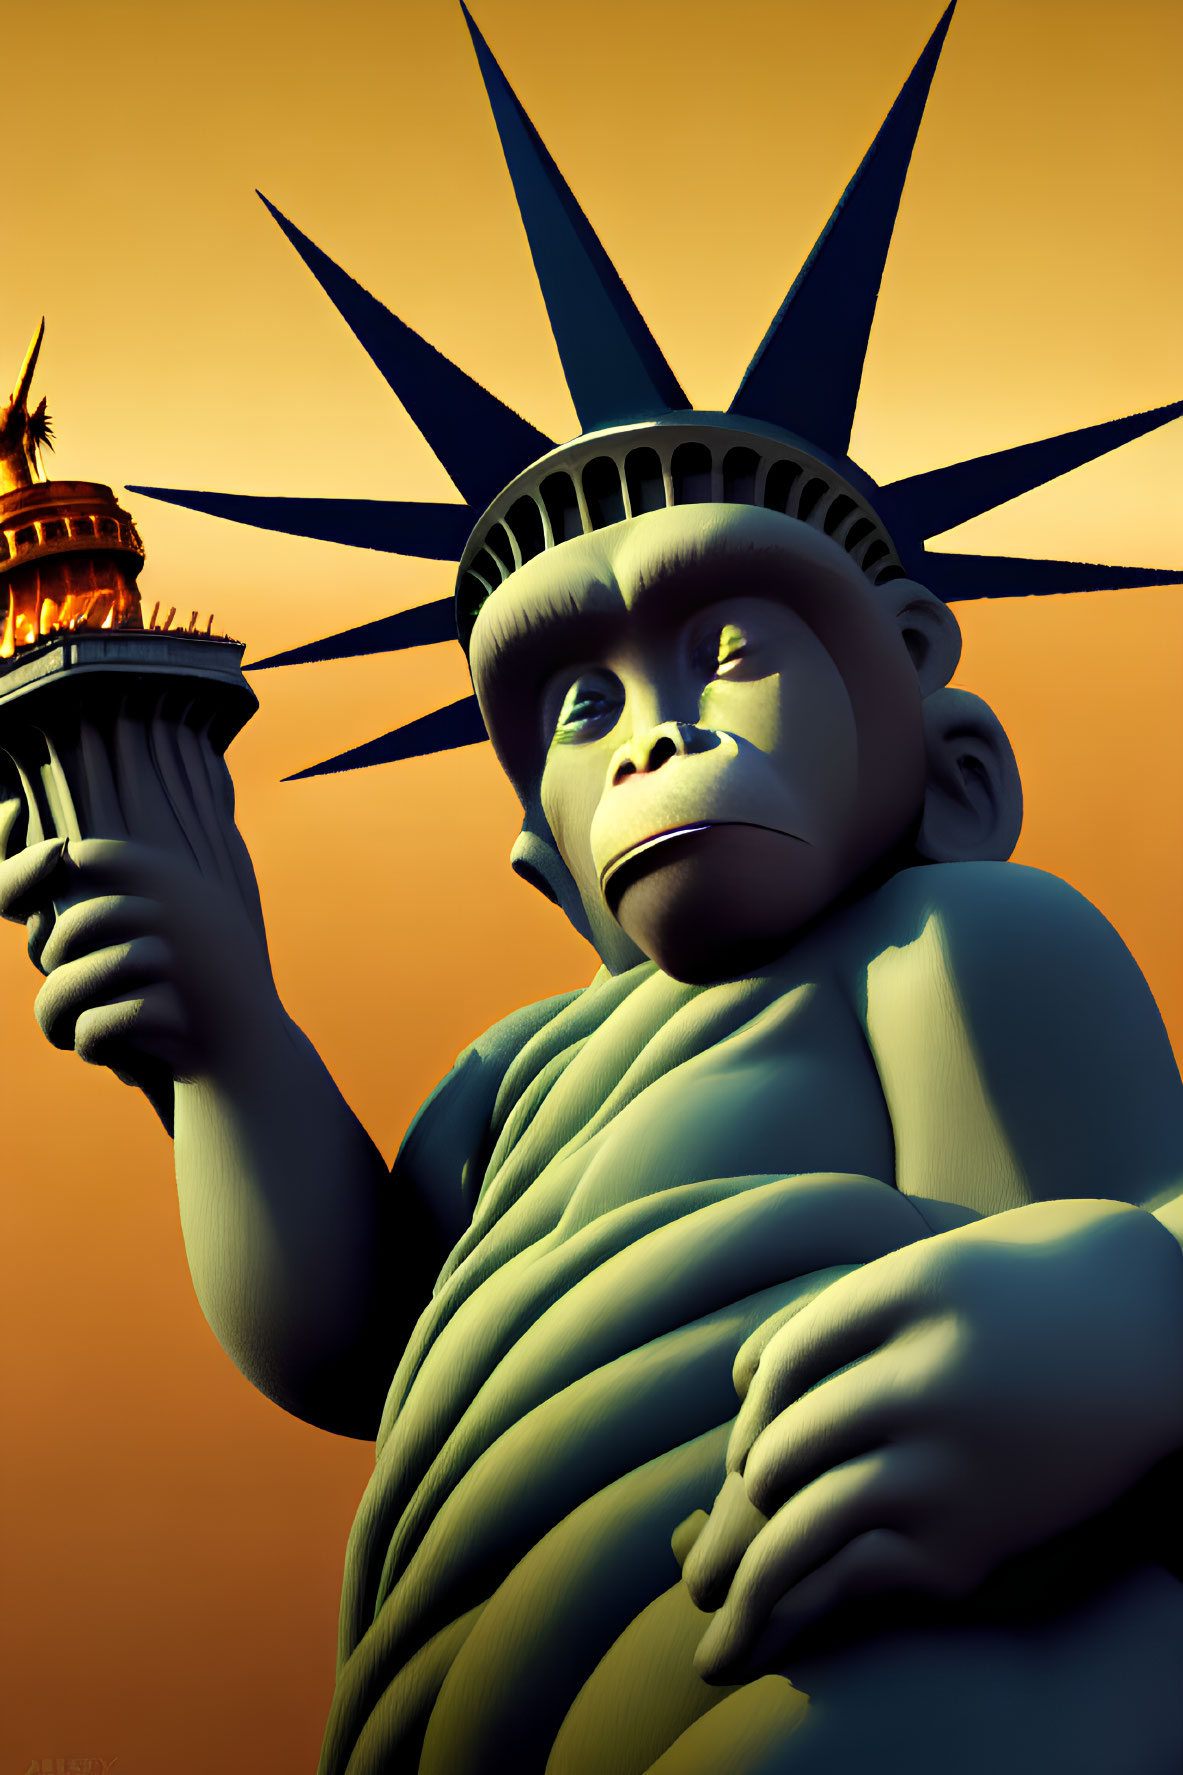 3D illustration of monkey as Statue of Liberty with crown and torch